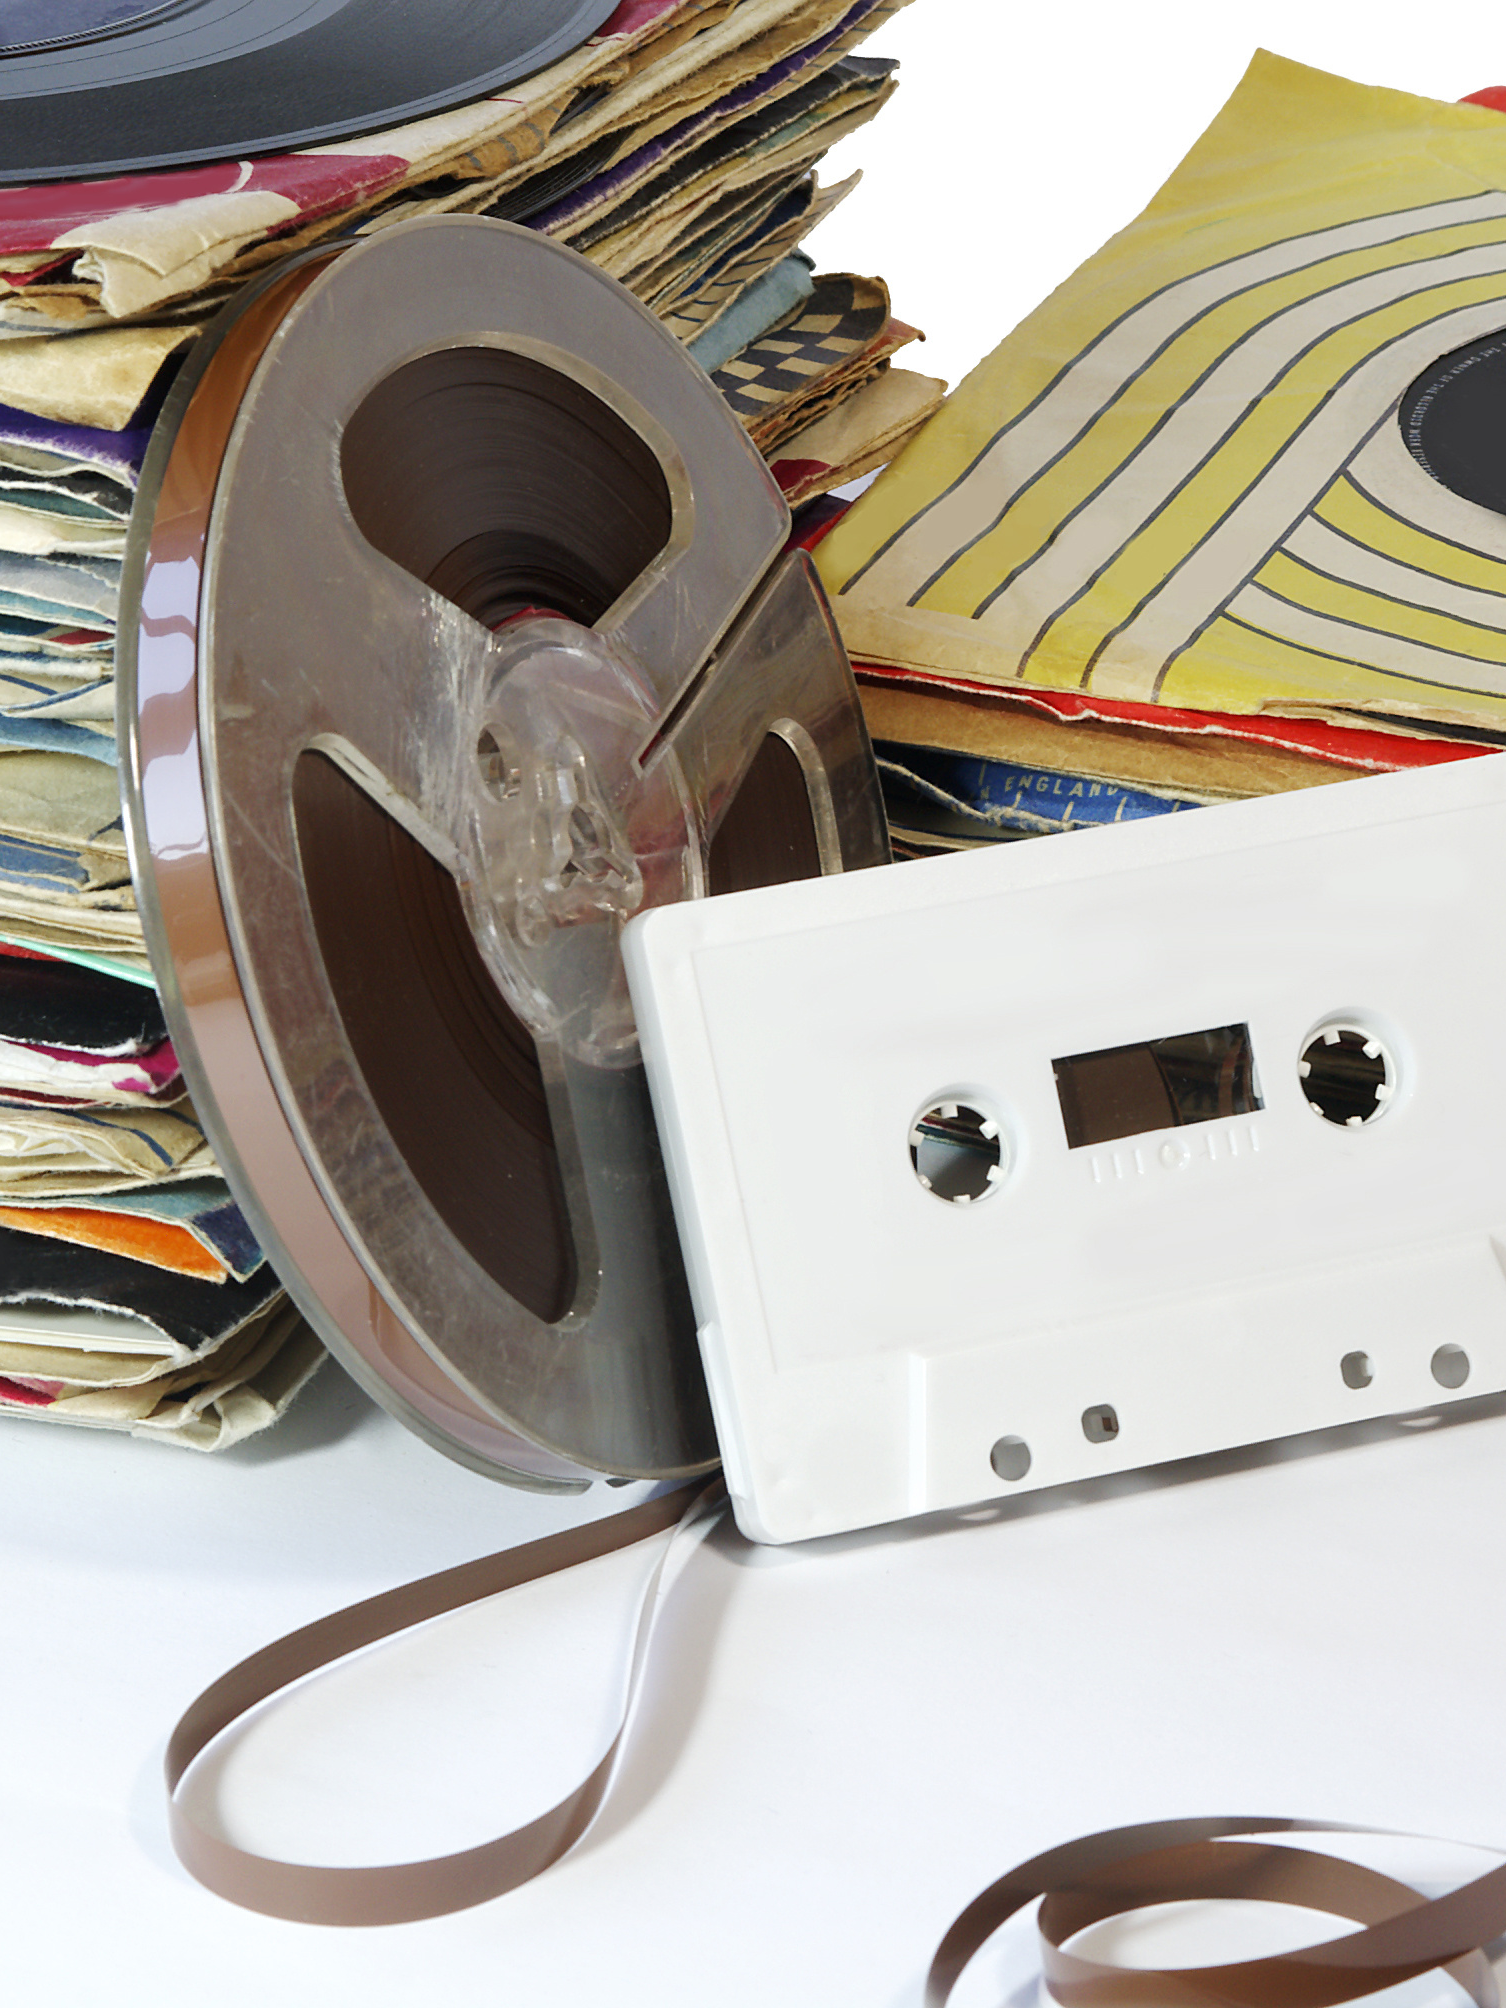 Audio reel tapes, audio cassettes and vinyl records are transferred to digital files and remastered to CD (Compact Disc) at Milwaukee Media Transfer.